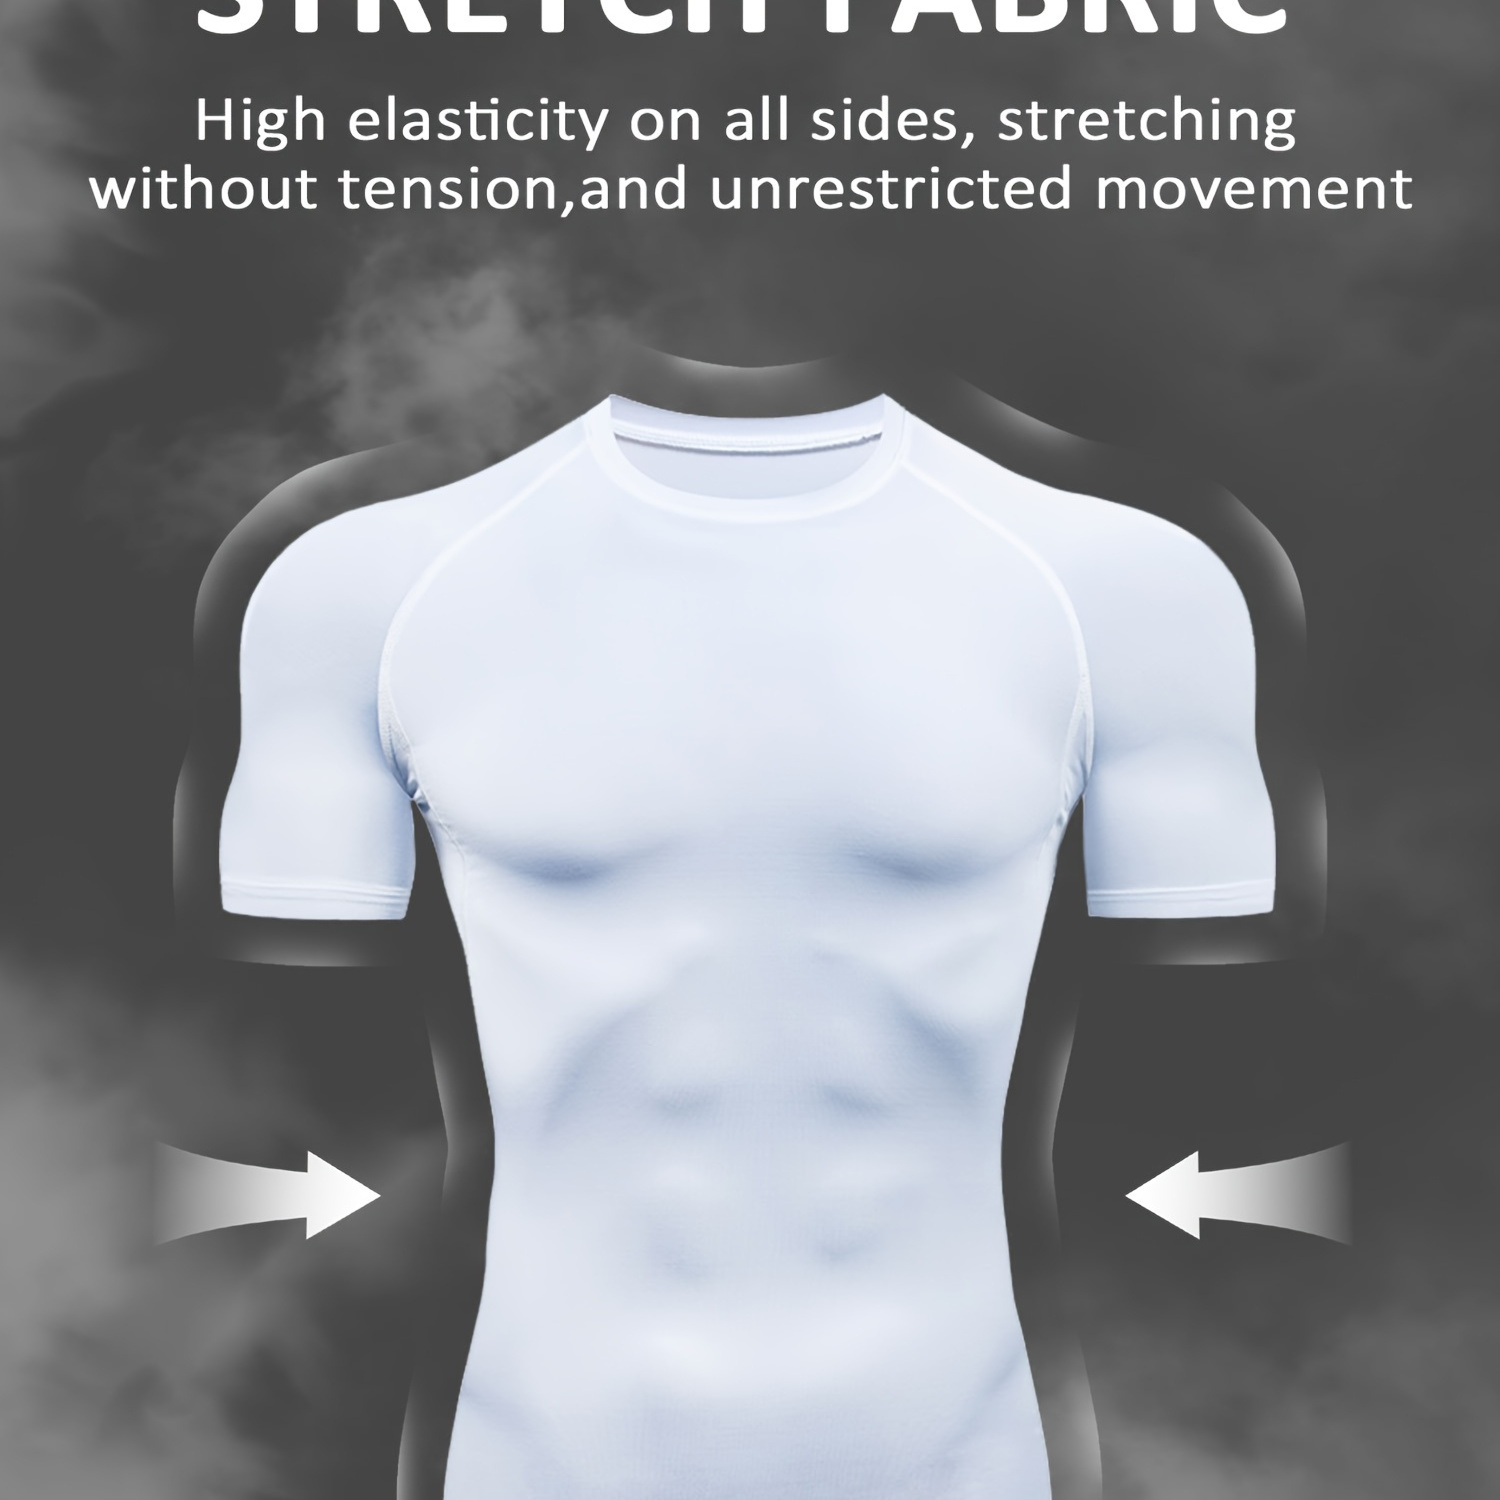 

Men's Comfy Quick-drying Sports Compression T-shirt, Highly Stretch Breathable Sweat-absorbing Tee Men's Summer Outdoor Clothes, Men's Clothing For Fitness Activities